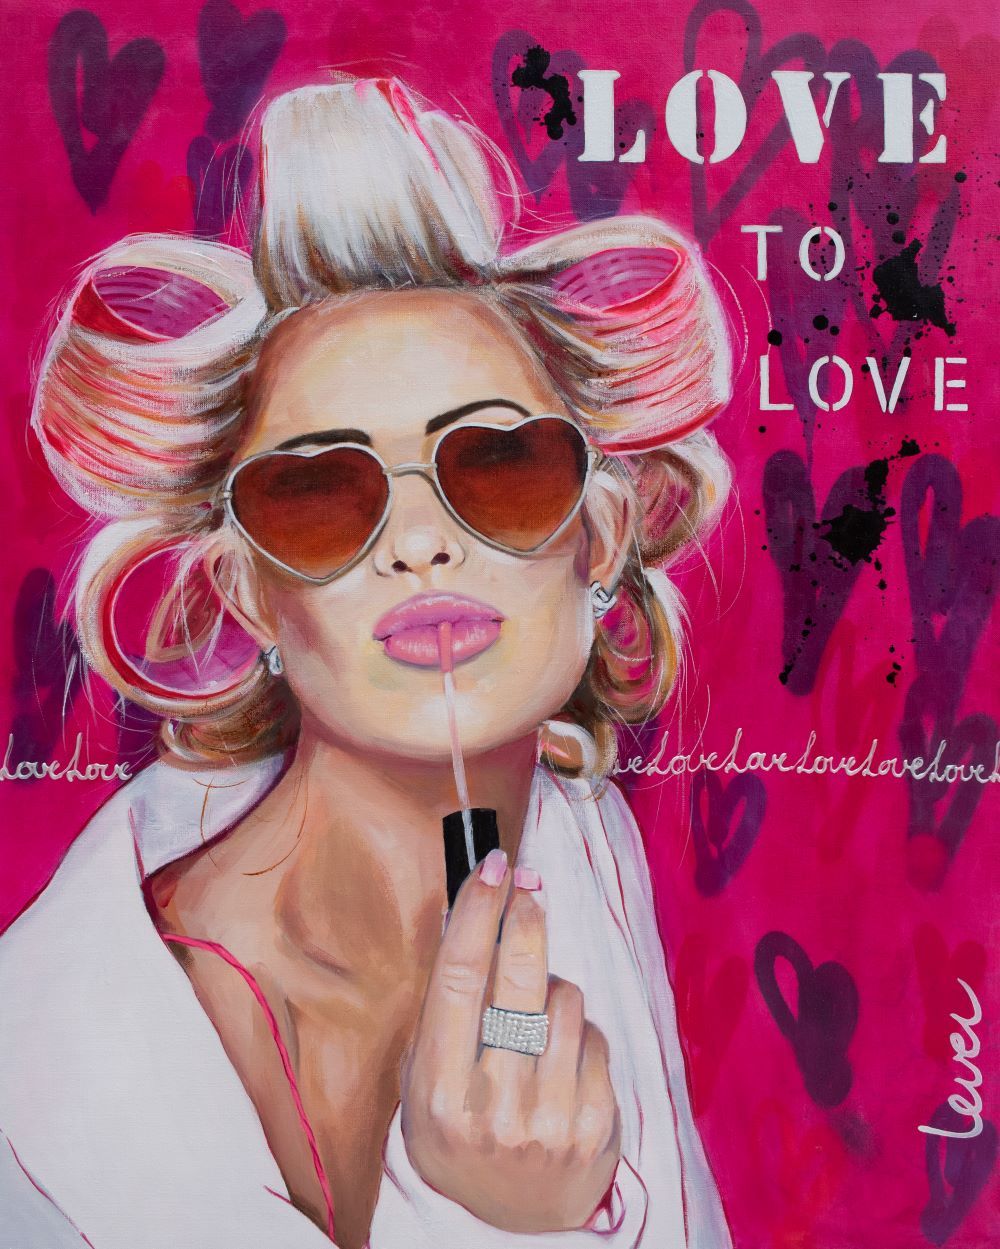 Love_to_Love_1000-76913be1 Contemporary mixed media artist, creating colorful, uplifting art.